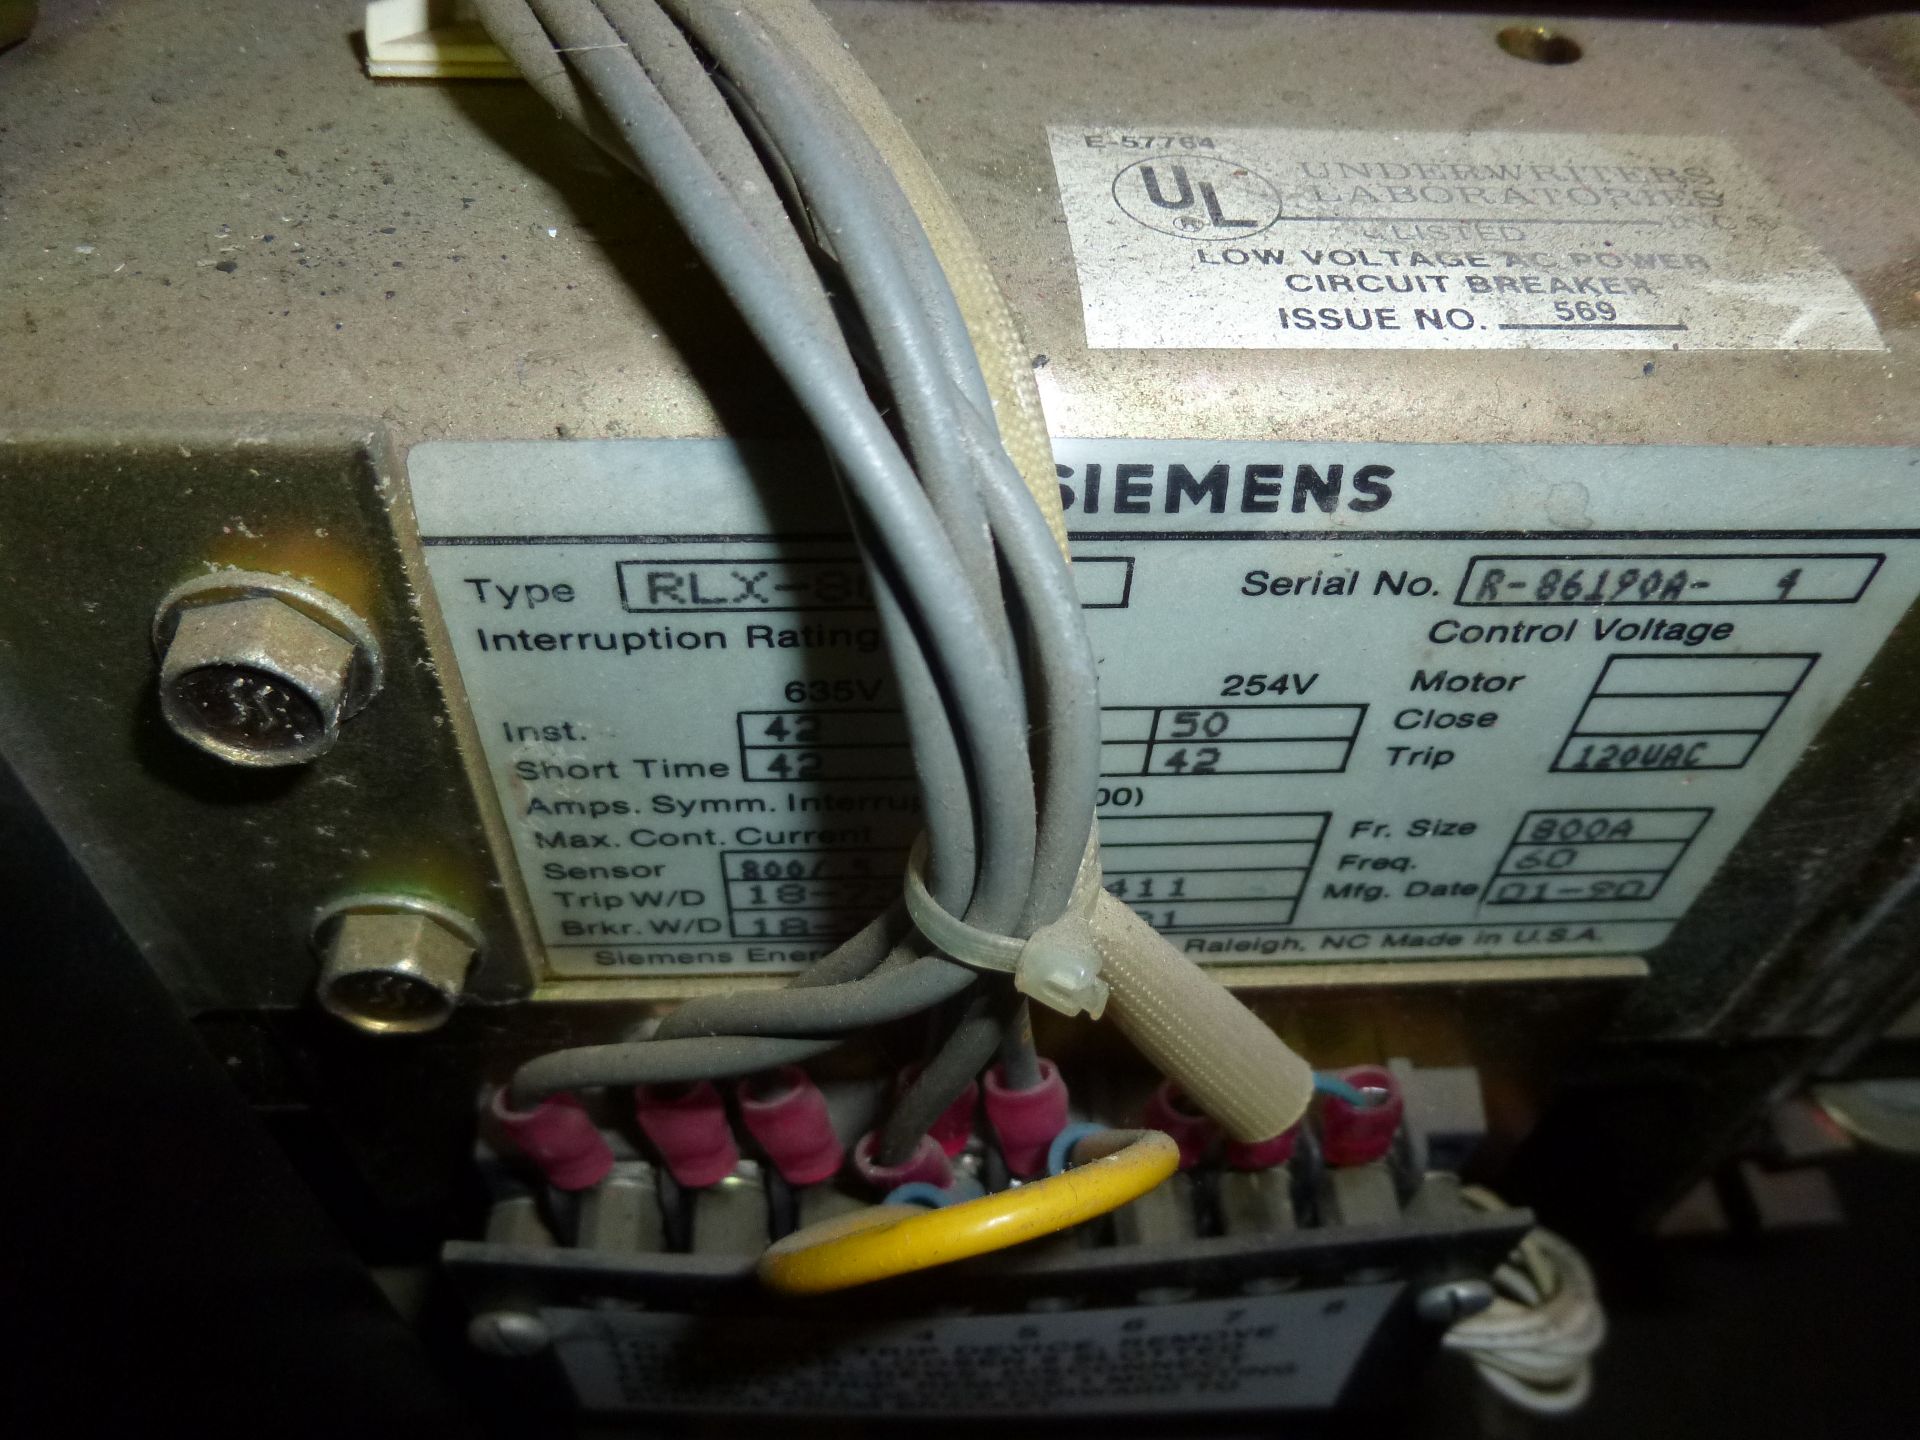 Siemens RLX-800 circuit breaker, 635v max, 800amp frame size with static trip III monitor - Image 3 of 6